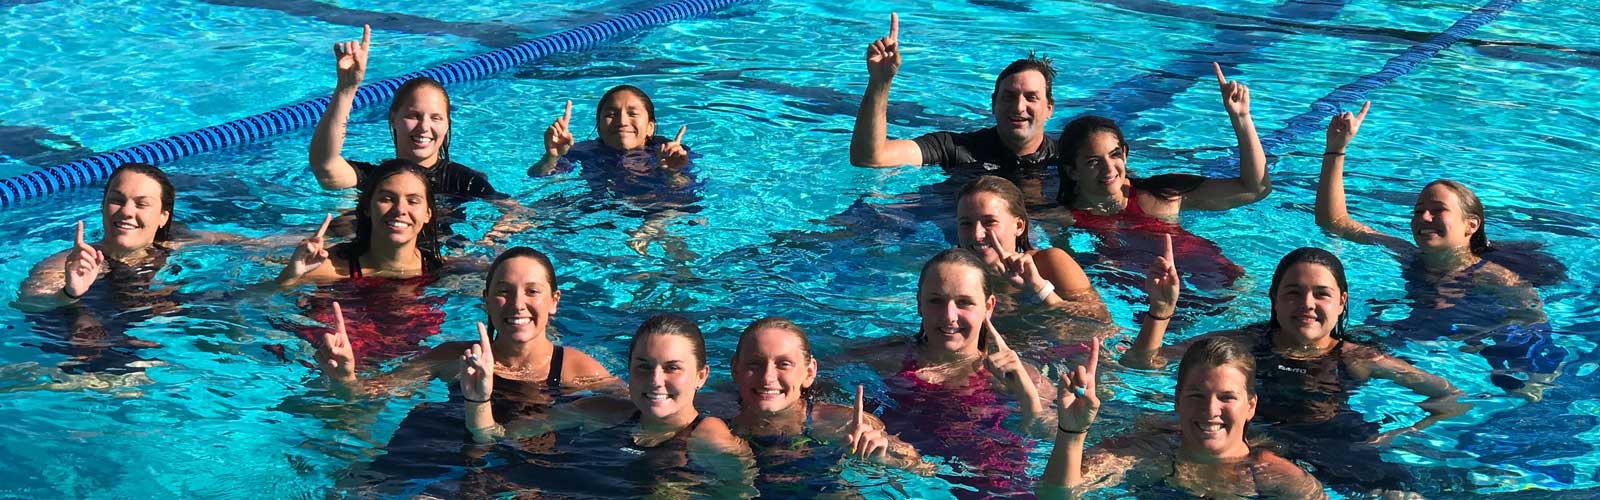 The Women's Swim Team and Coach Mark Bennett celebrate their victory.